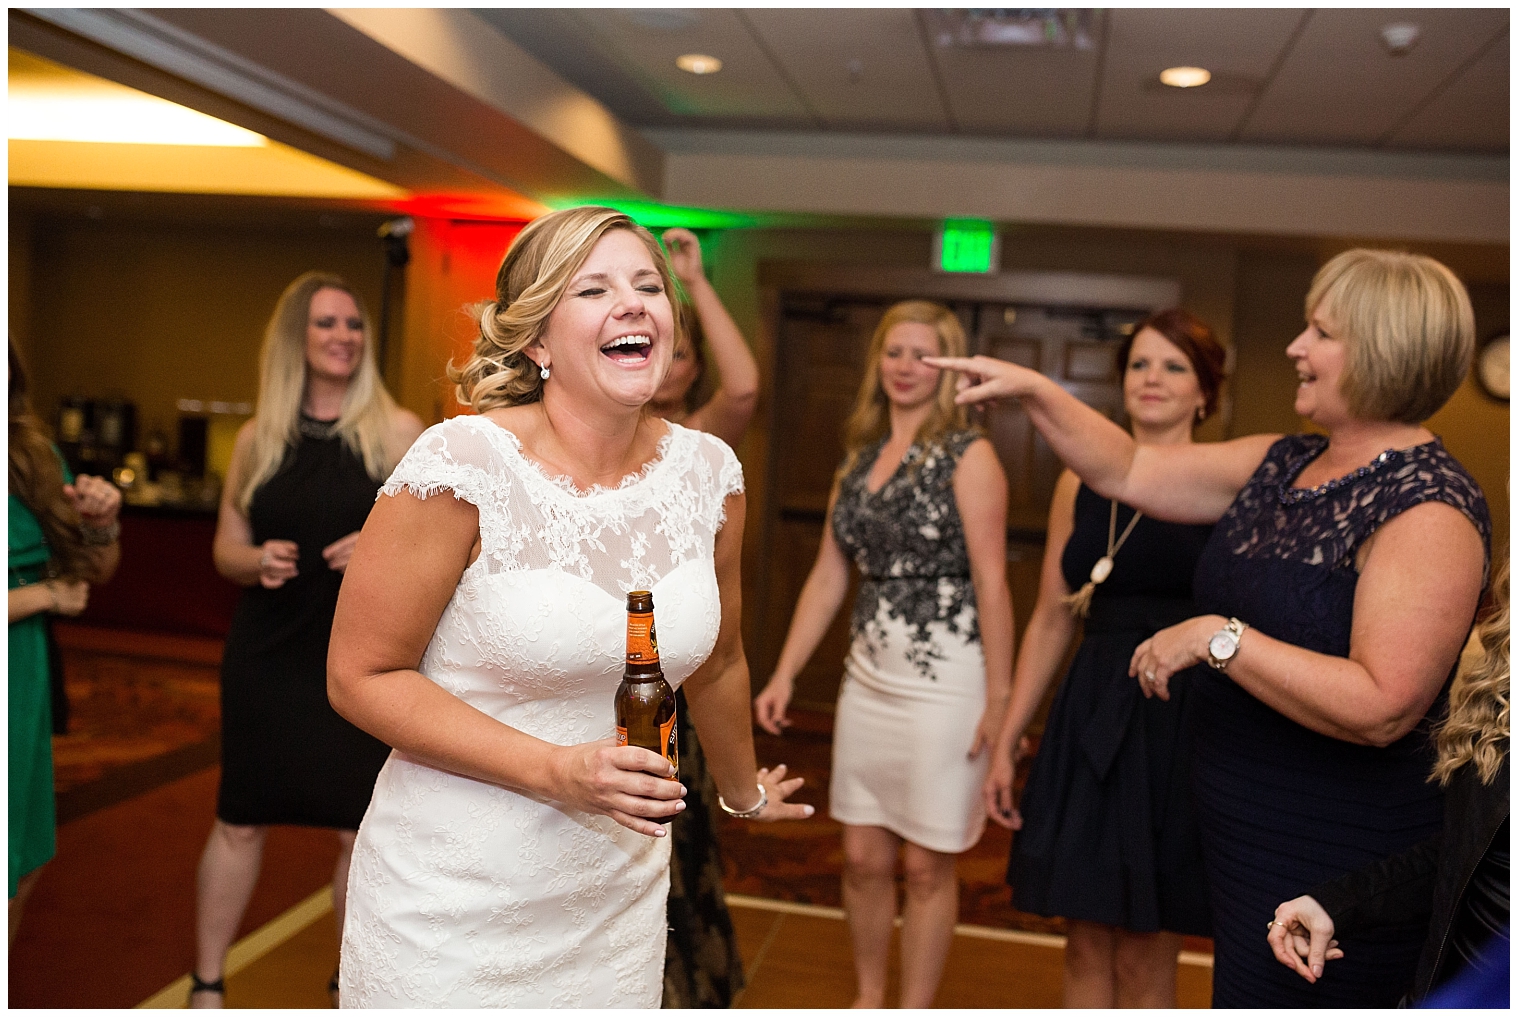 Bride laughs while dancing at her Breckenridge wedding reception.